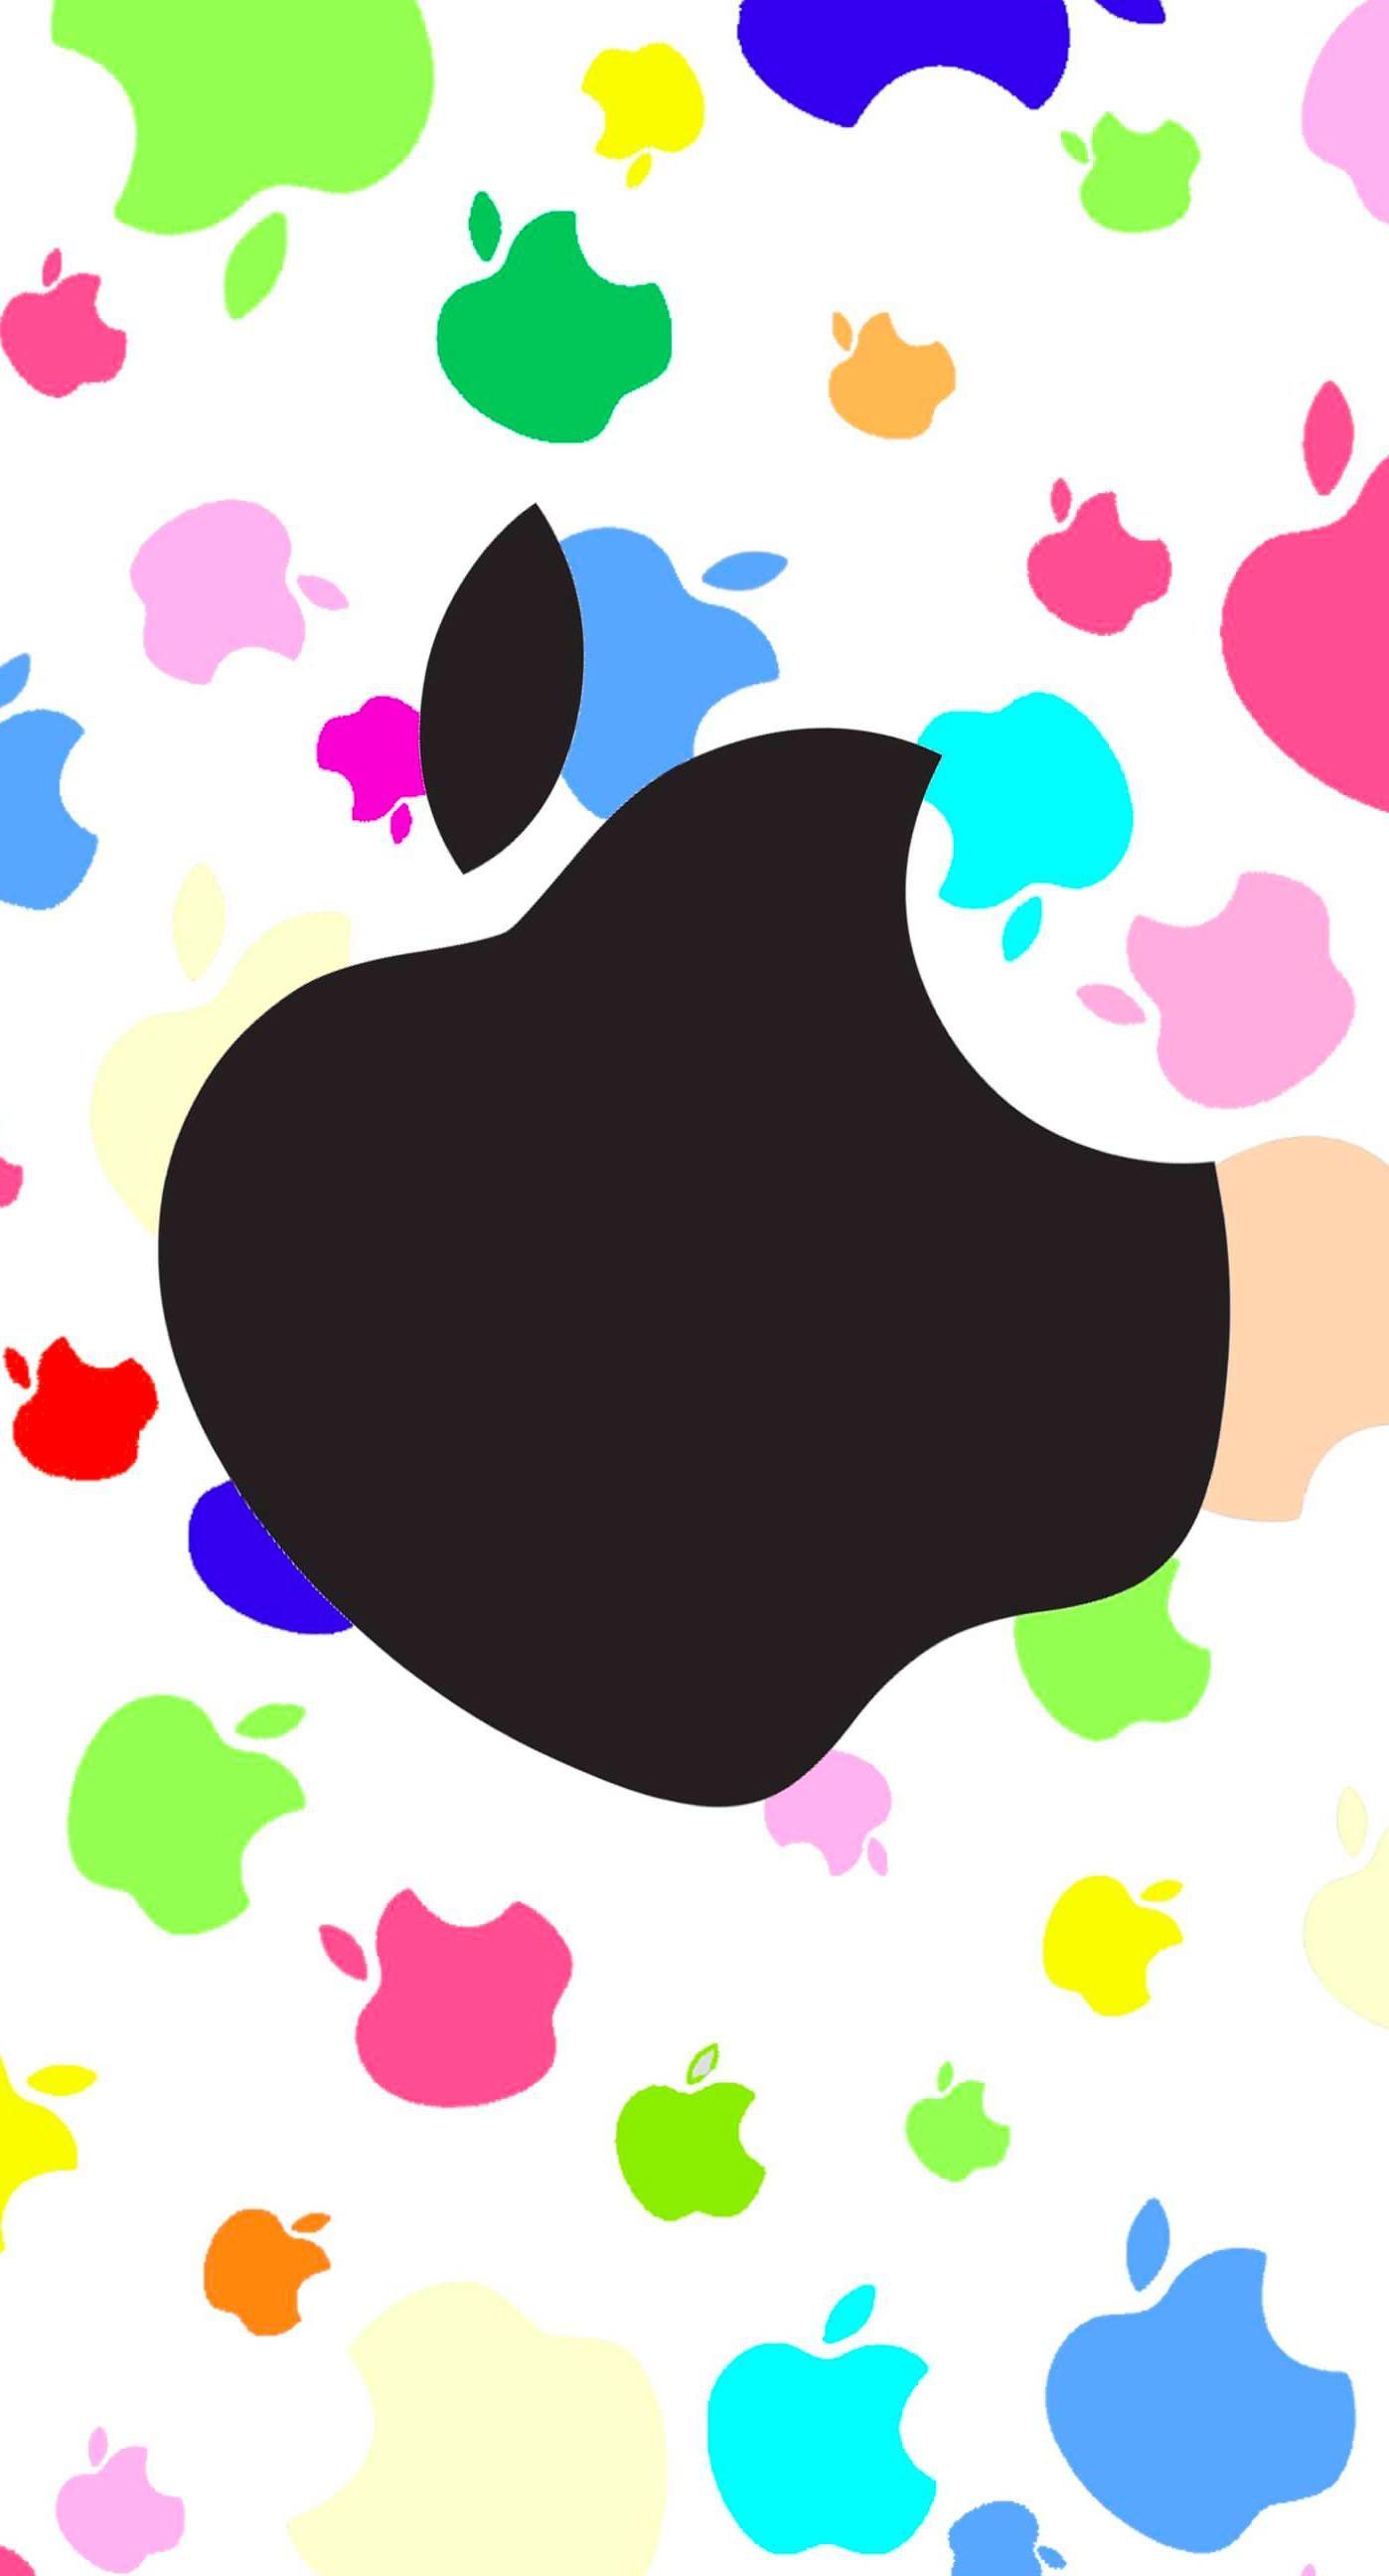 Colorful Apple Logo - Colorful Apple Logo Wallpapers - Bing images | Apple Love! | Apple ...